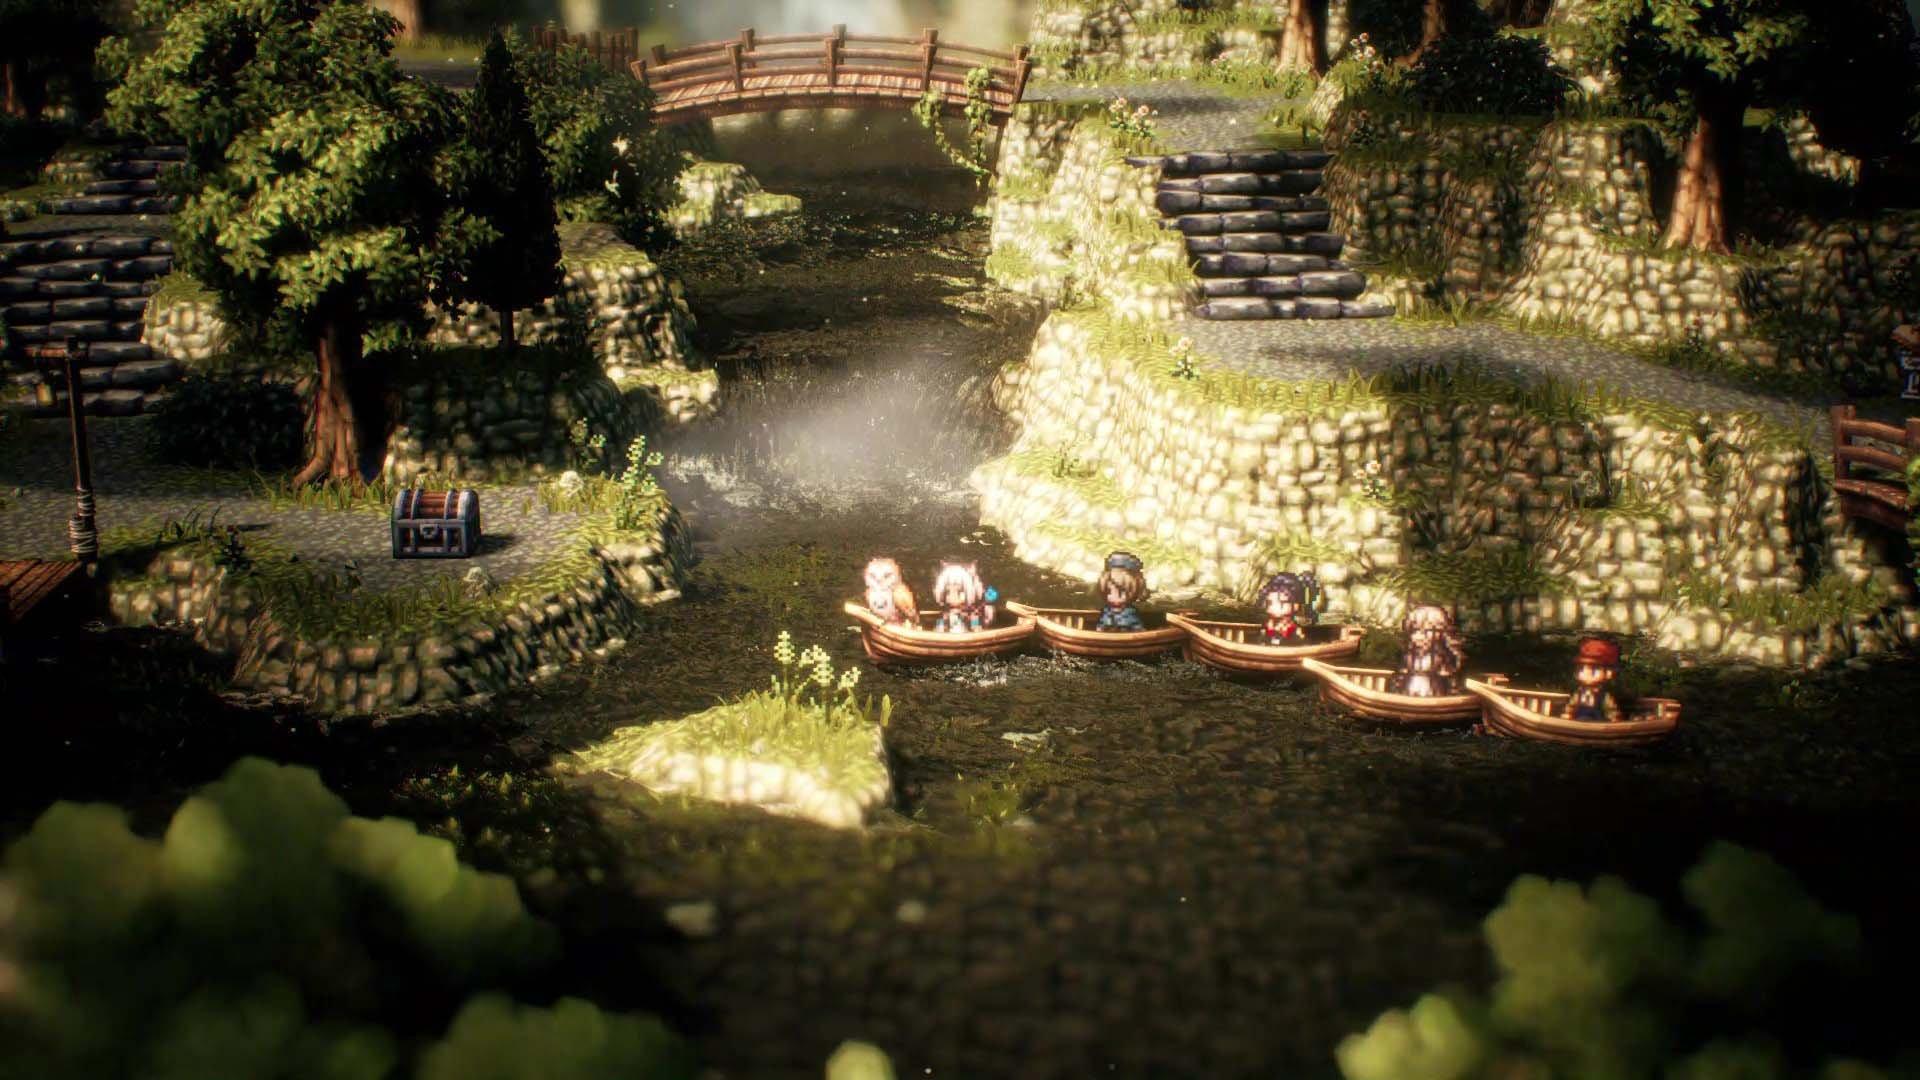 How to get Octopath Traveler 2 for Nintendo Switch free from GameStop